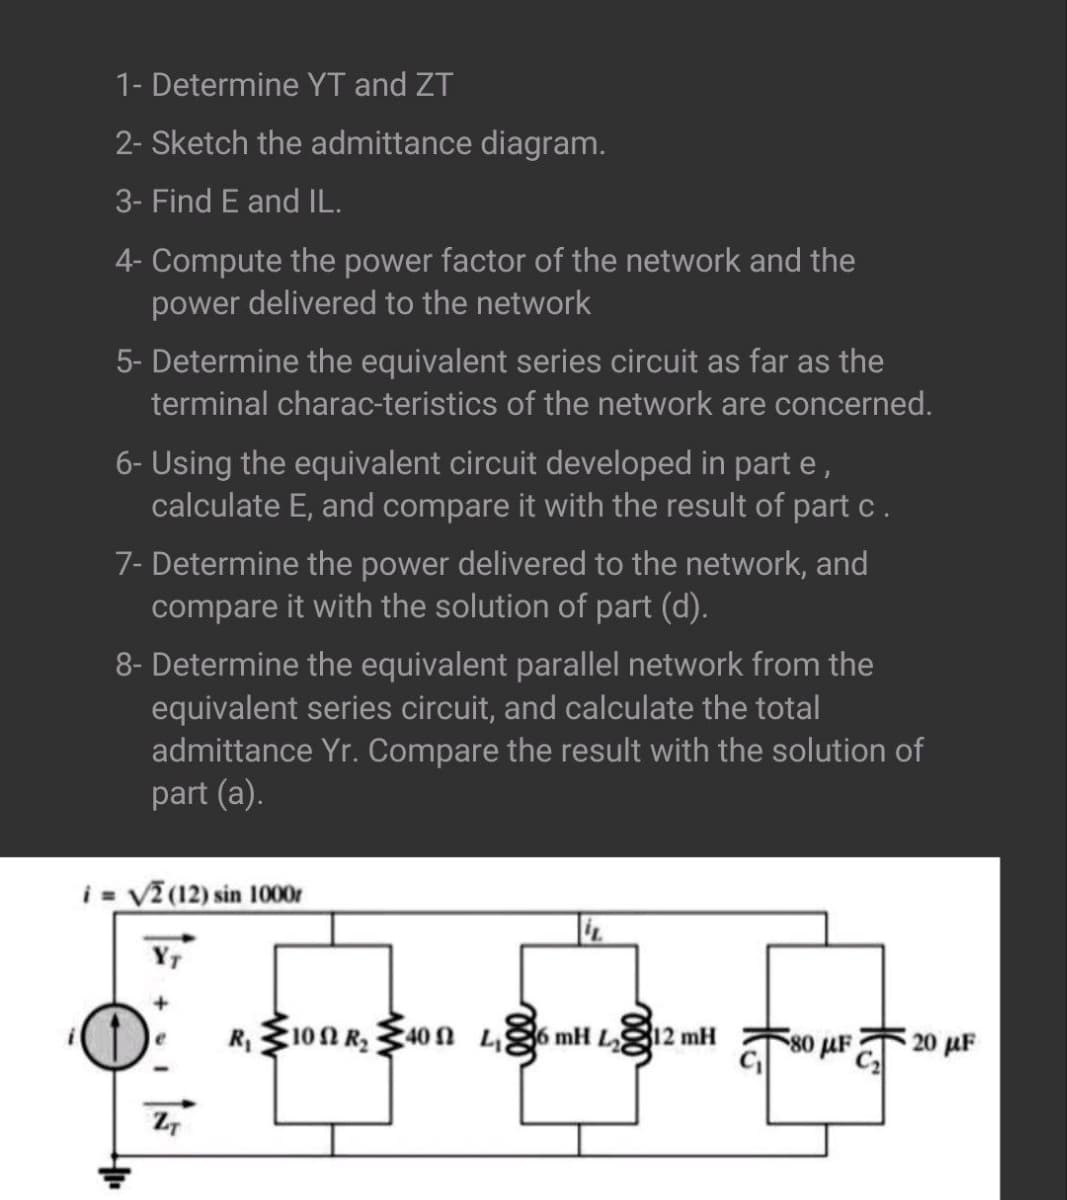 1- Determine YT and ZT
2- Sketch the admittance diagram.
3- Find E and IL.
4- Compute the power factor of the network and the
power delivered to the network
5- Determine the equivalent series circuit as far as the
terminal characteristics of the network are concerned.
6- Using the equivalent circuit developed in part e,
calculate E, and compare it with the result of part c.
7- Determine the power delivered to the network, and
compare it with the solution of part (d).
8- Determine the equivalent parallel network from the
equivalent series circuit, and calculate the total
admittance Yr. Compare the result with the solution of
part (a).
i = √2 (12) sin 1000r
ZT
R₁100 R₂40 L₁6 mH L12 mH
580 με
20 μF